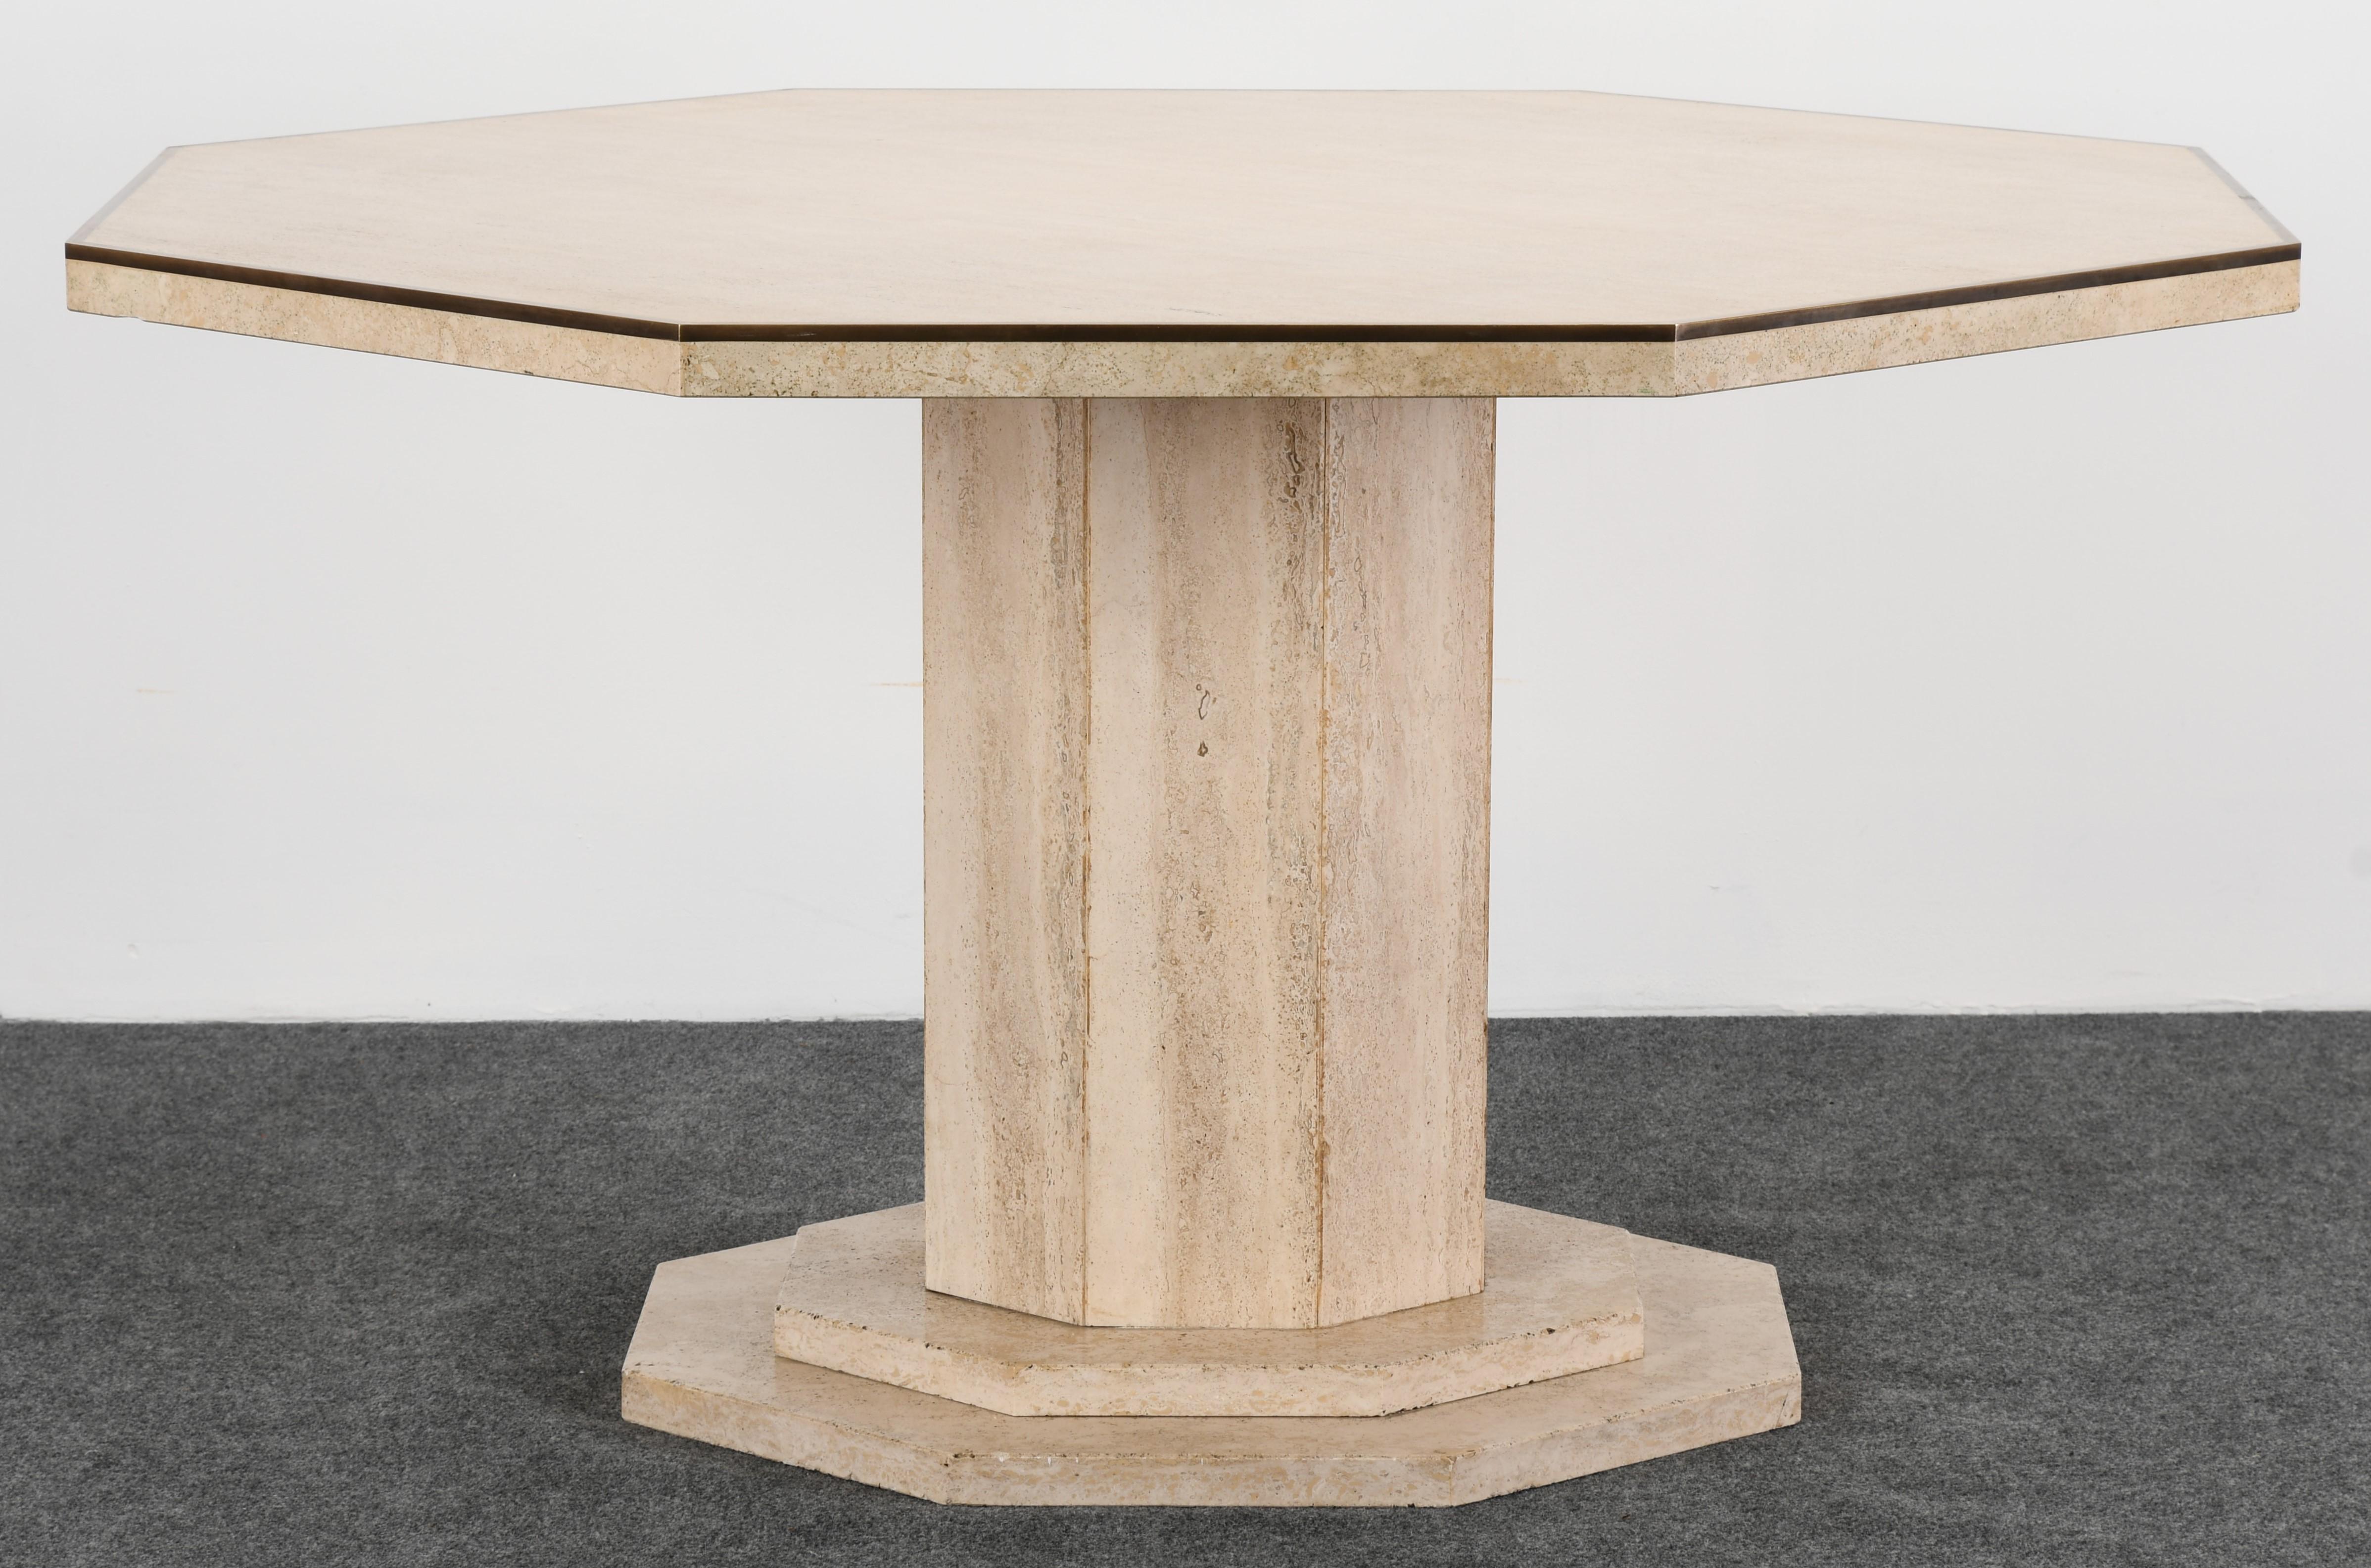 An impressive Roche Bobois style travertine octagonal dining table with brass trim on a stacked travertine pedestal. The table is in good condition with age appropriate wear. Would make a great center table for a hallway or entryway, as well as a